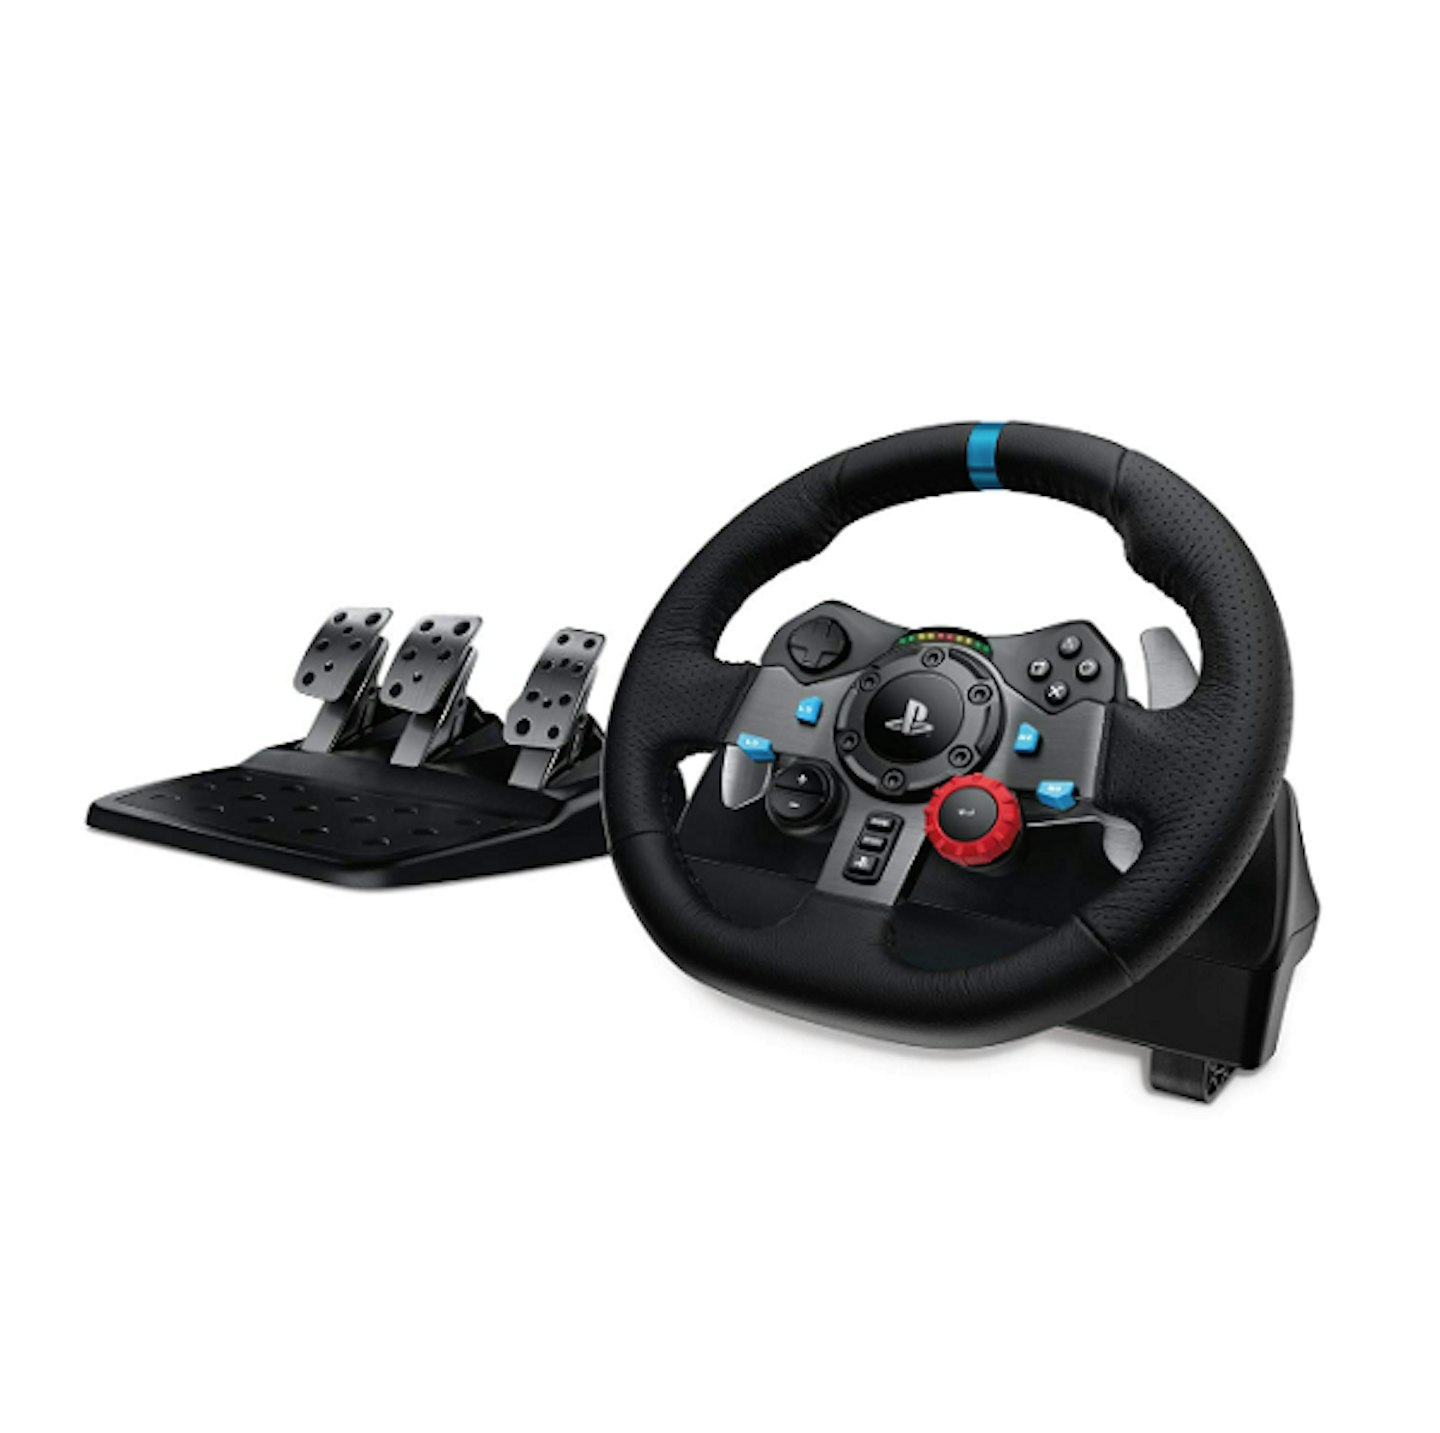 Logitech G29 Driving Force Racing Wheel and Pedals, £179.99